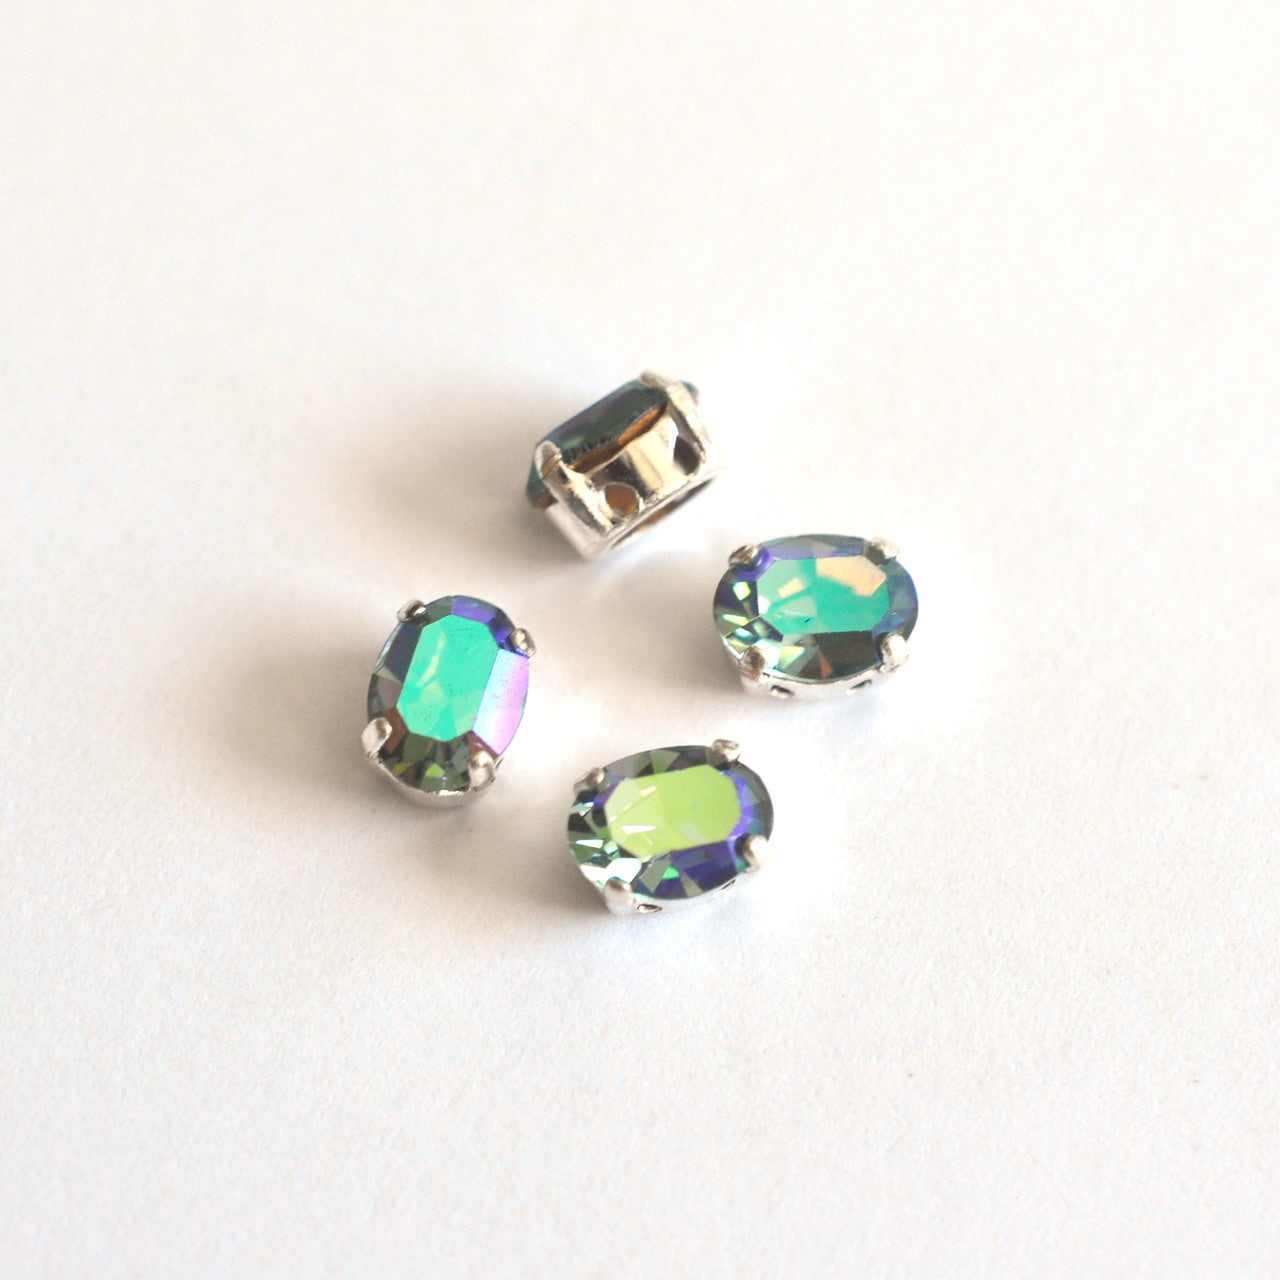 Indian Sapphire AB 8x6mm Sew On Set Ovals - 4 Pieces